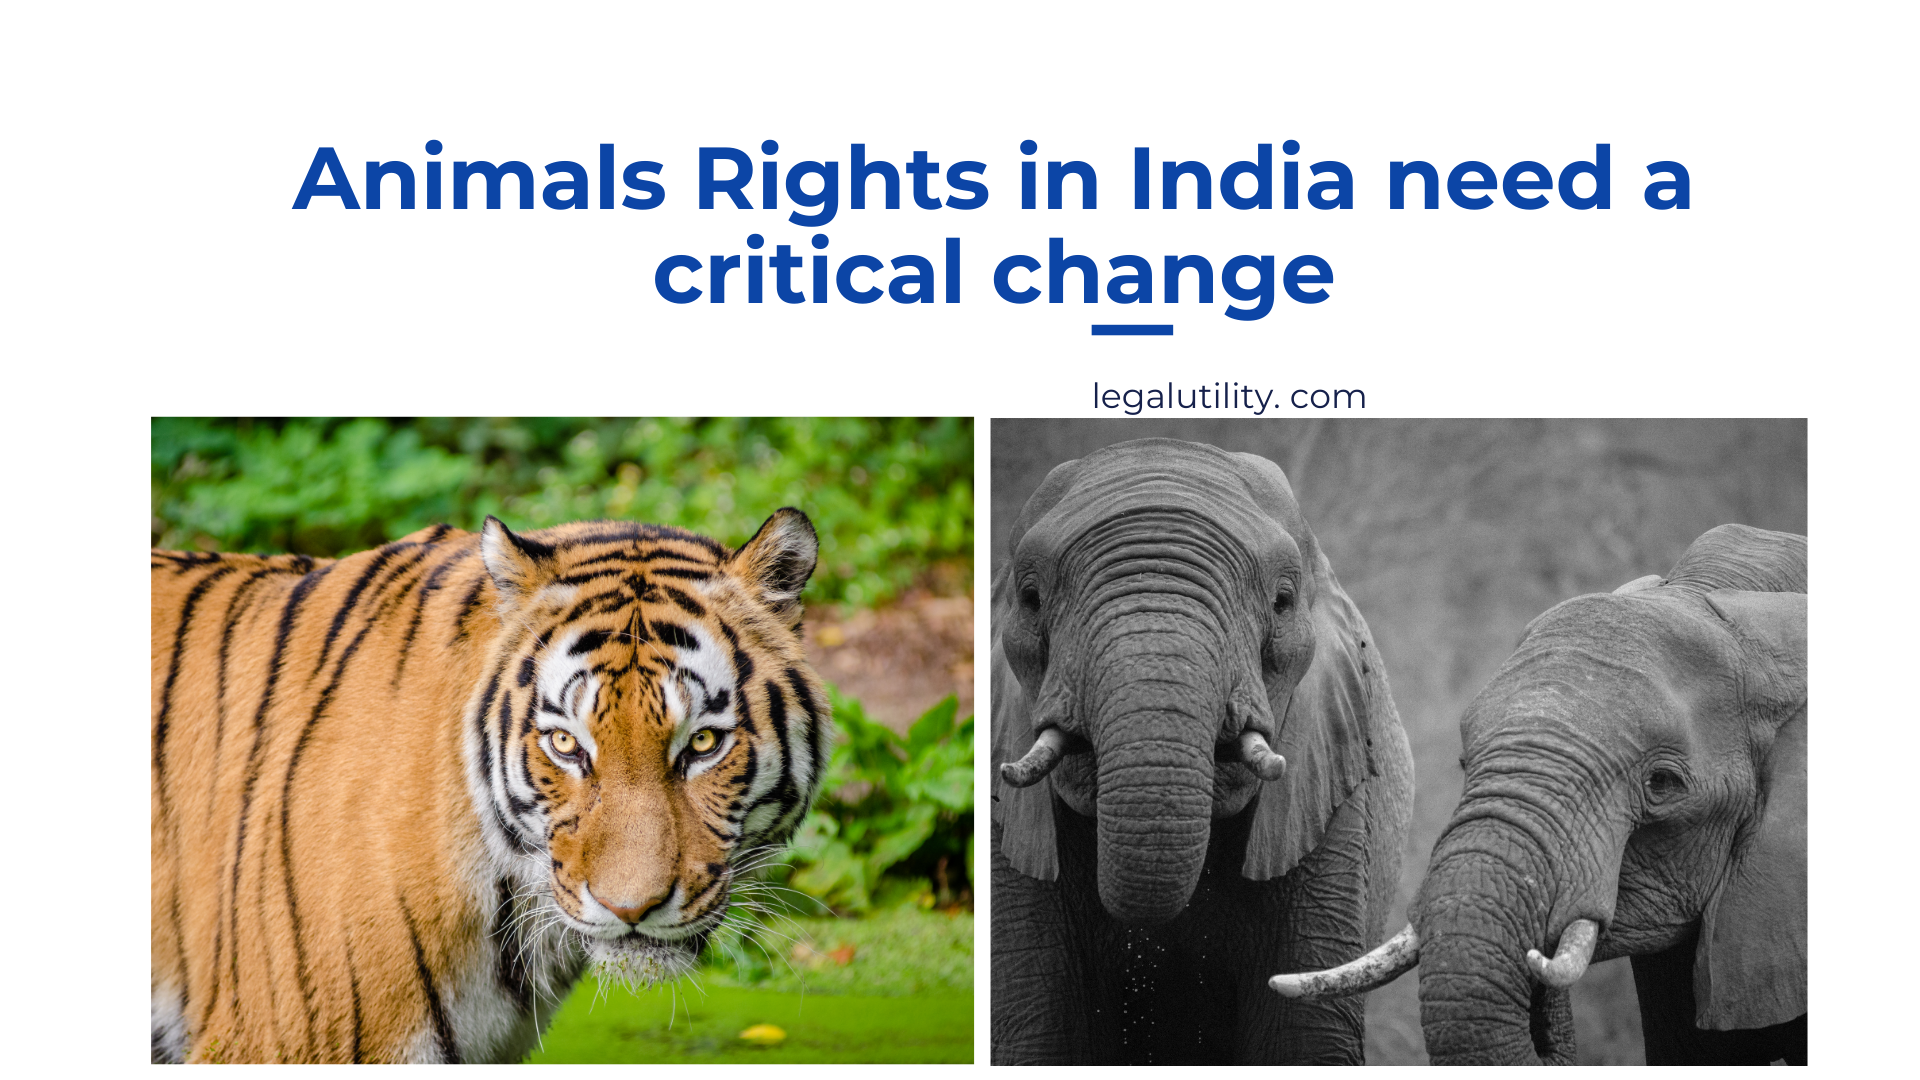 Animal rights in India need a critical change